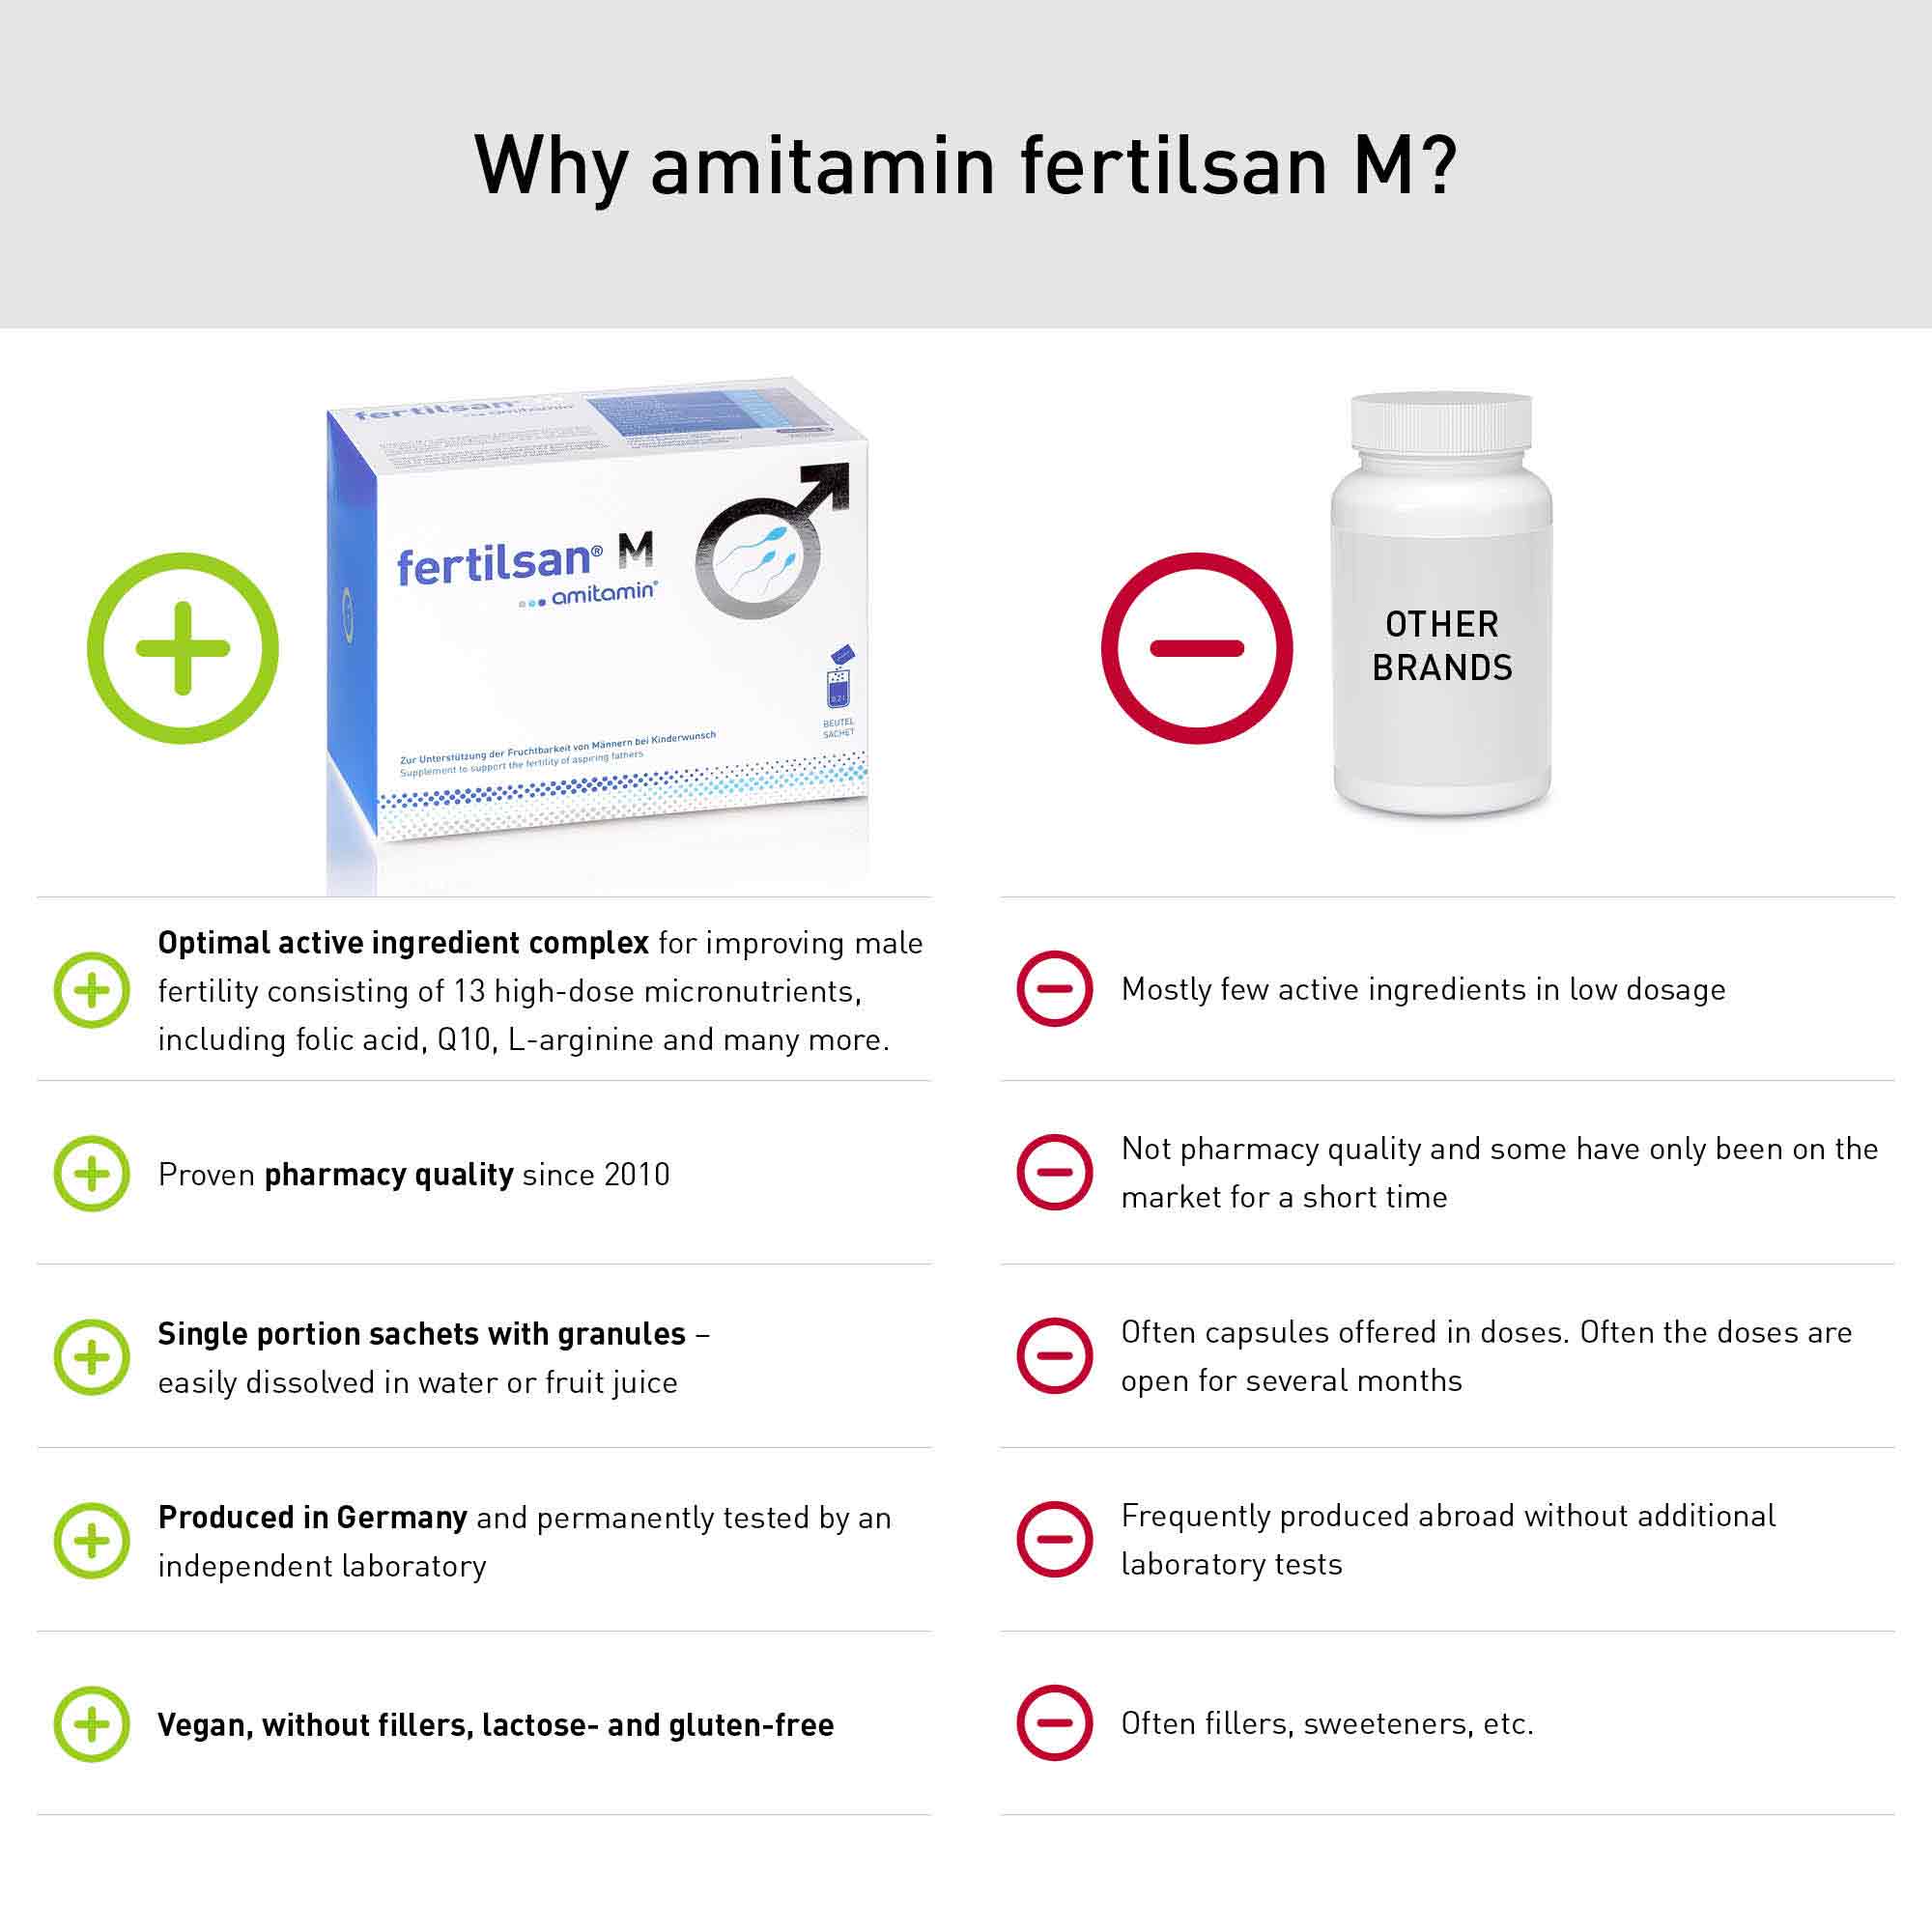 amitamin Complete Family Planning Bundle - For Him & Her - 3 FertilsanM (Powder or Capsules) + 3 Fertil F Phase1 (Bundle of 90 Days Supply)